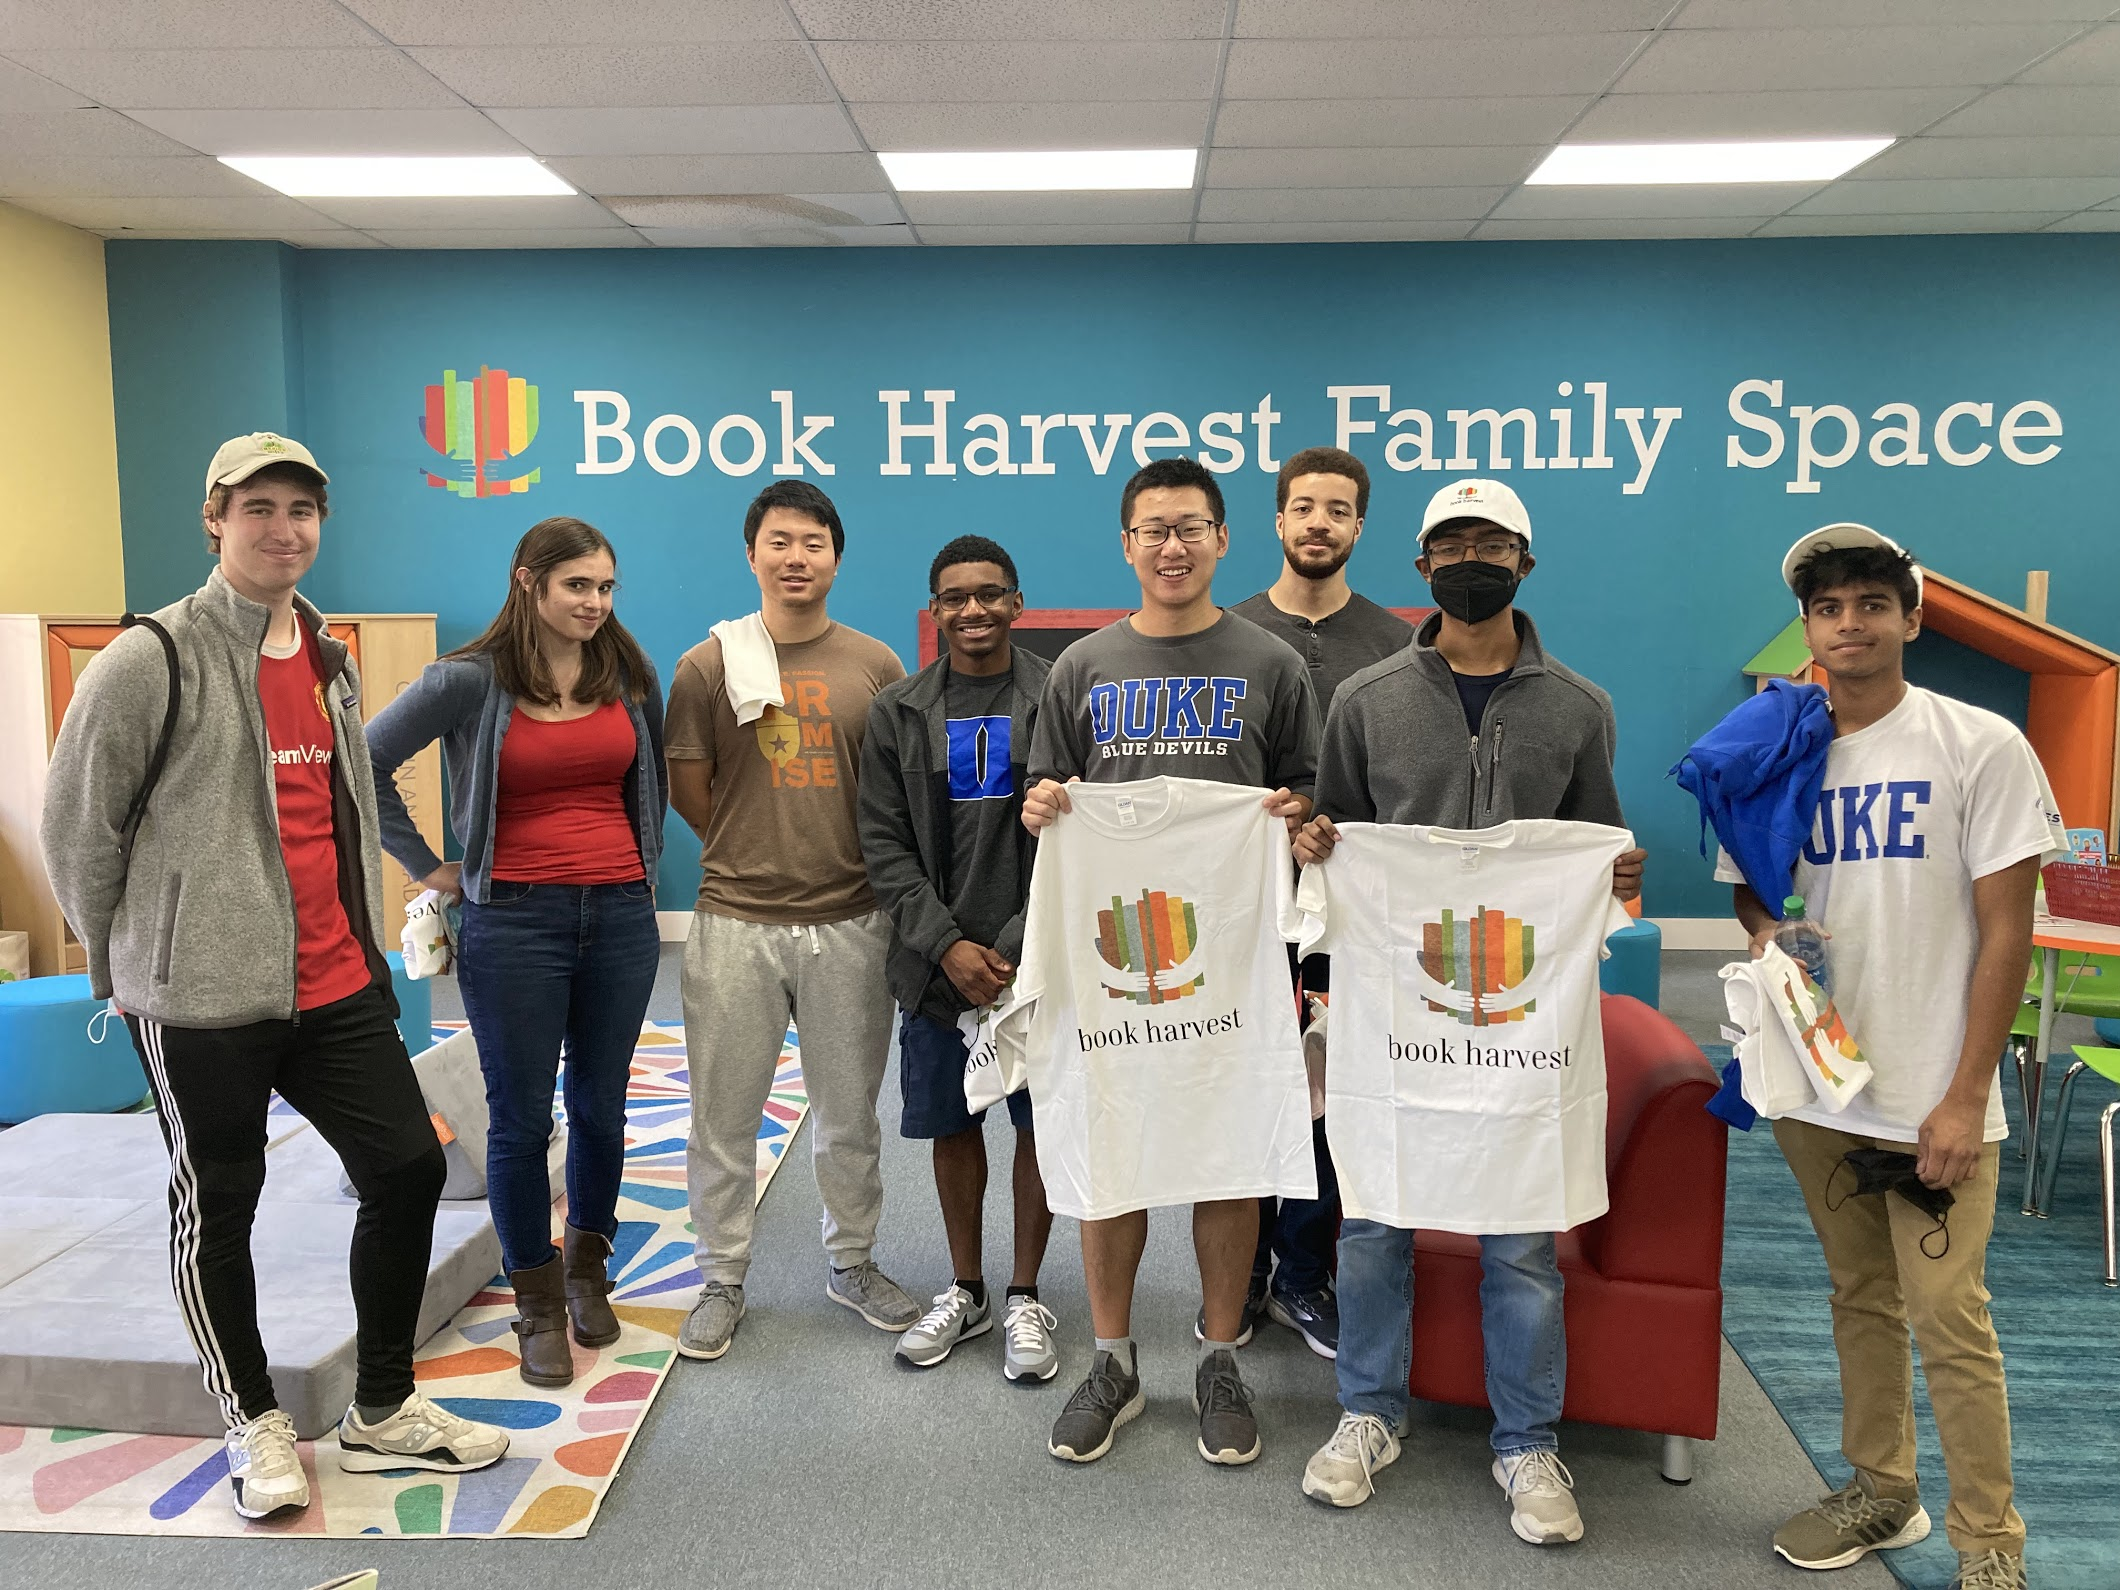 Book Harvest - One of the many service events I attended this semester